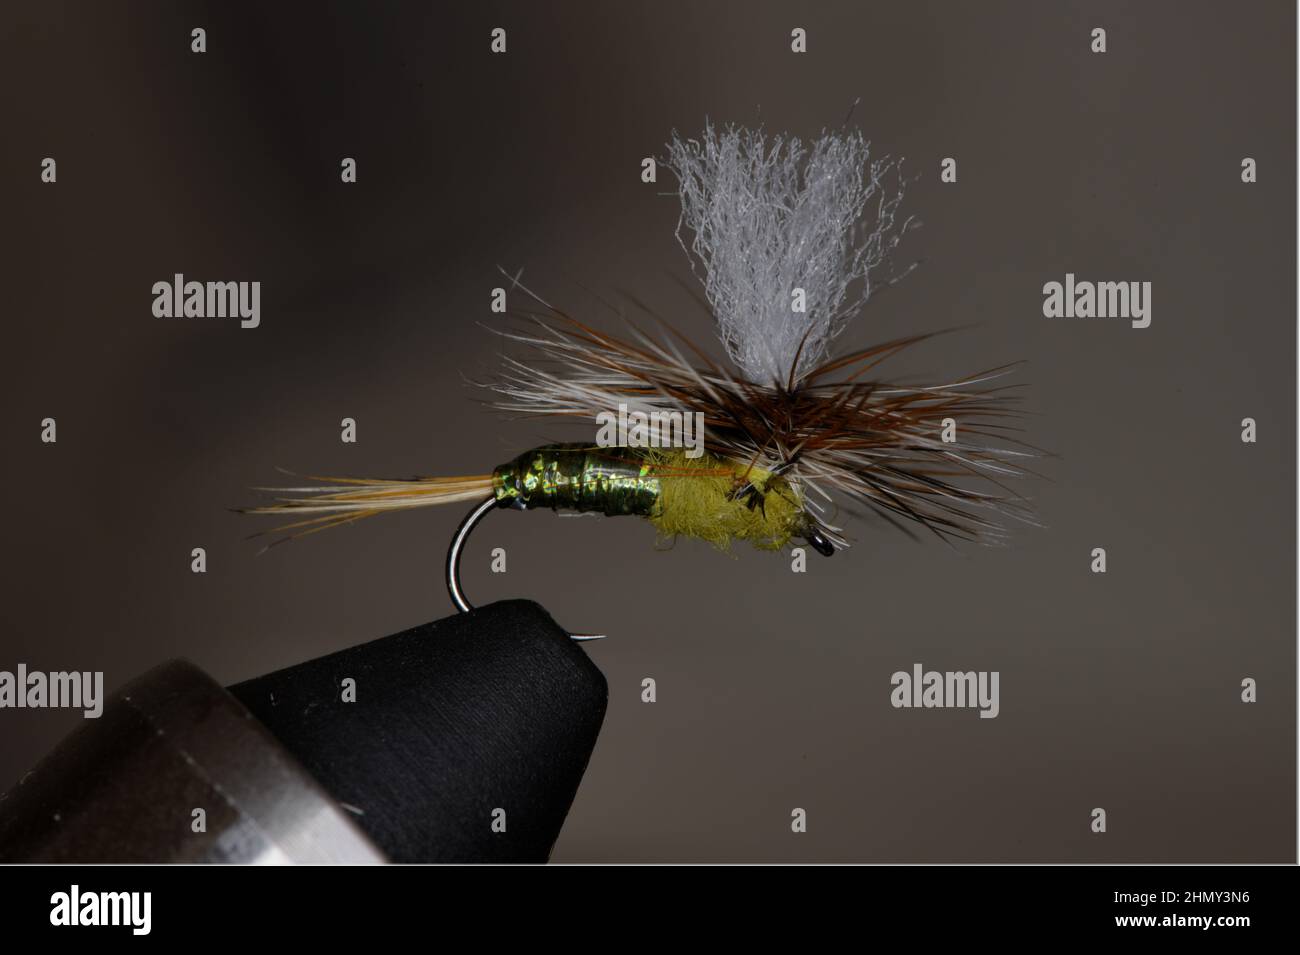 Closeup shot of a fishing hackle on a blurred background Stock